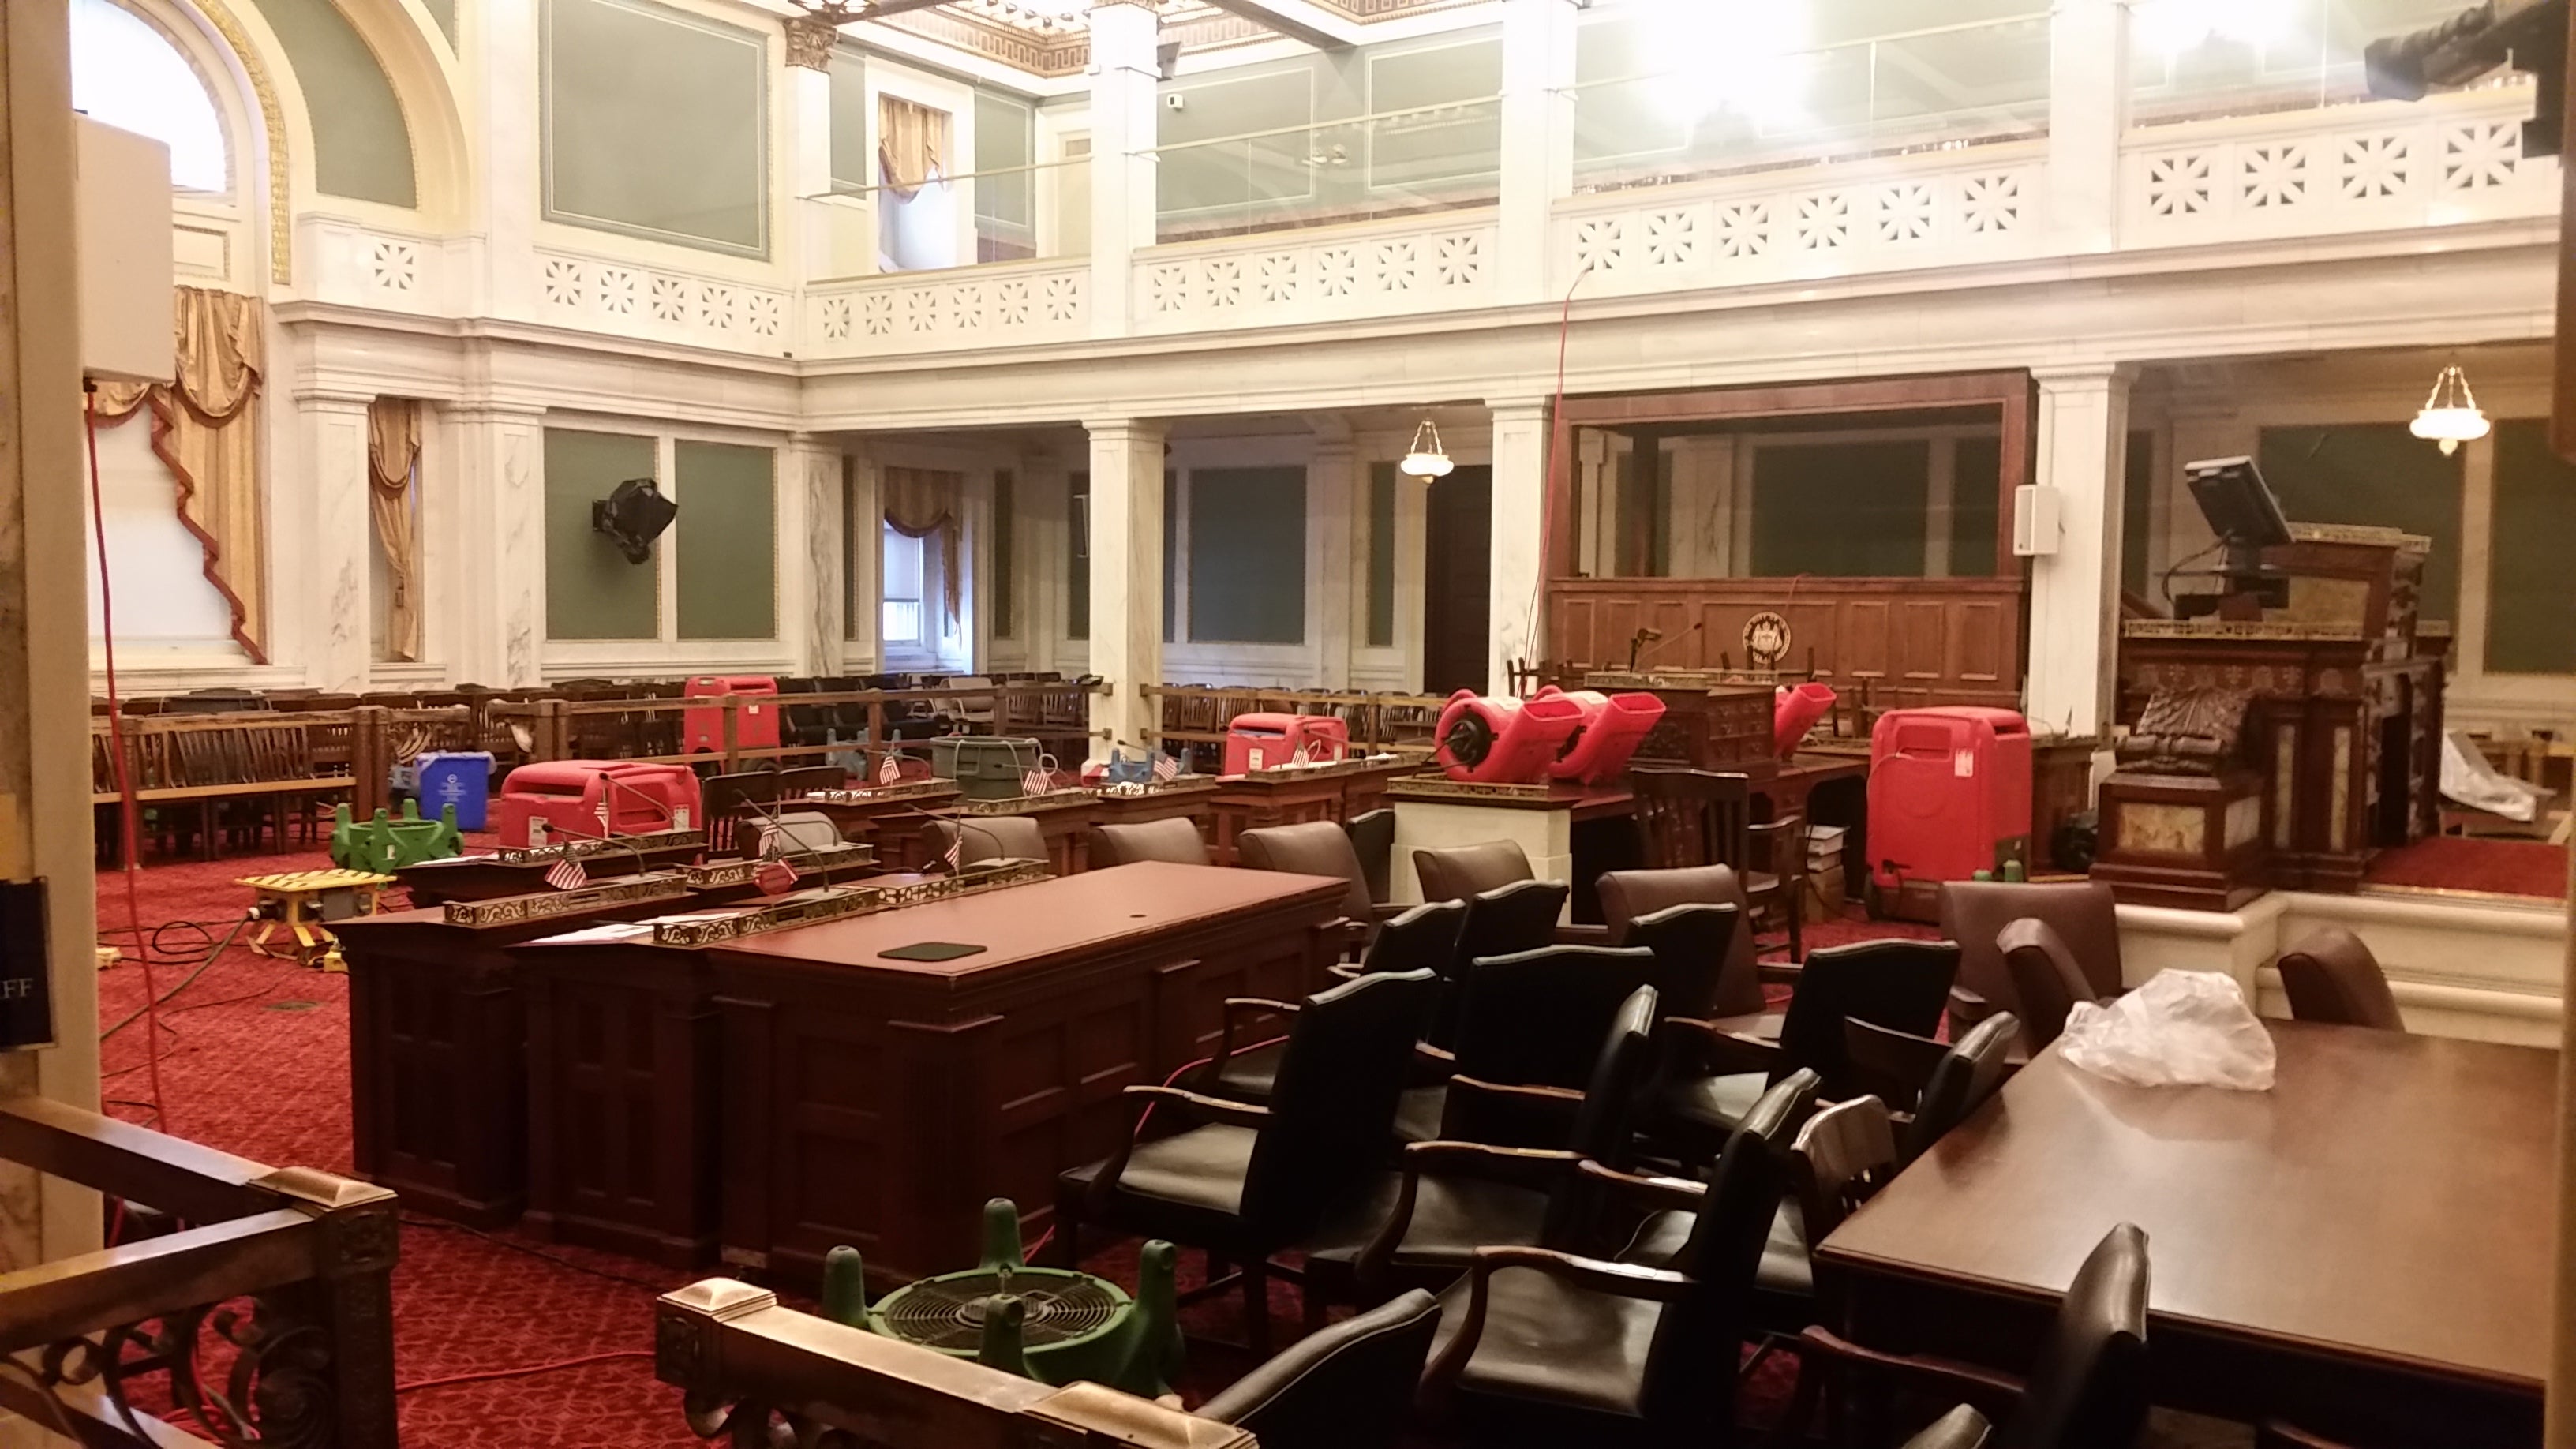  The drying-out process continues in Philadelphia City Council chambers following Tuesday's flooding. (Tom MacDonald/WHYY) 